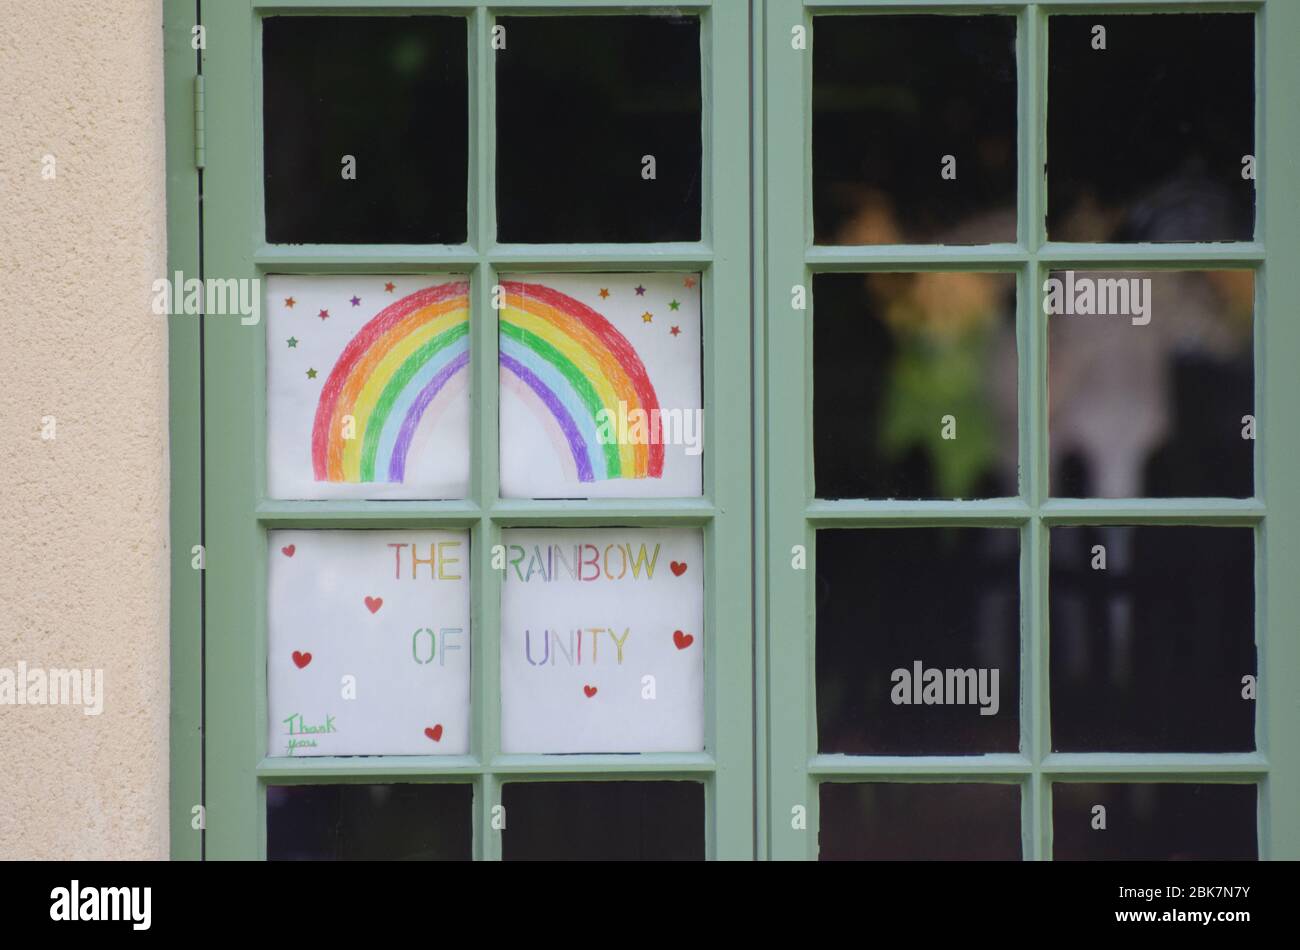 A home made rainbow painting in a house window in the UK during the 2020 Covid-19 pandemic Rainbows in windows at this times symbolised unity in hope Stock Photo